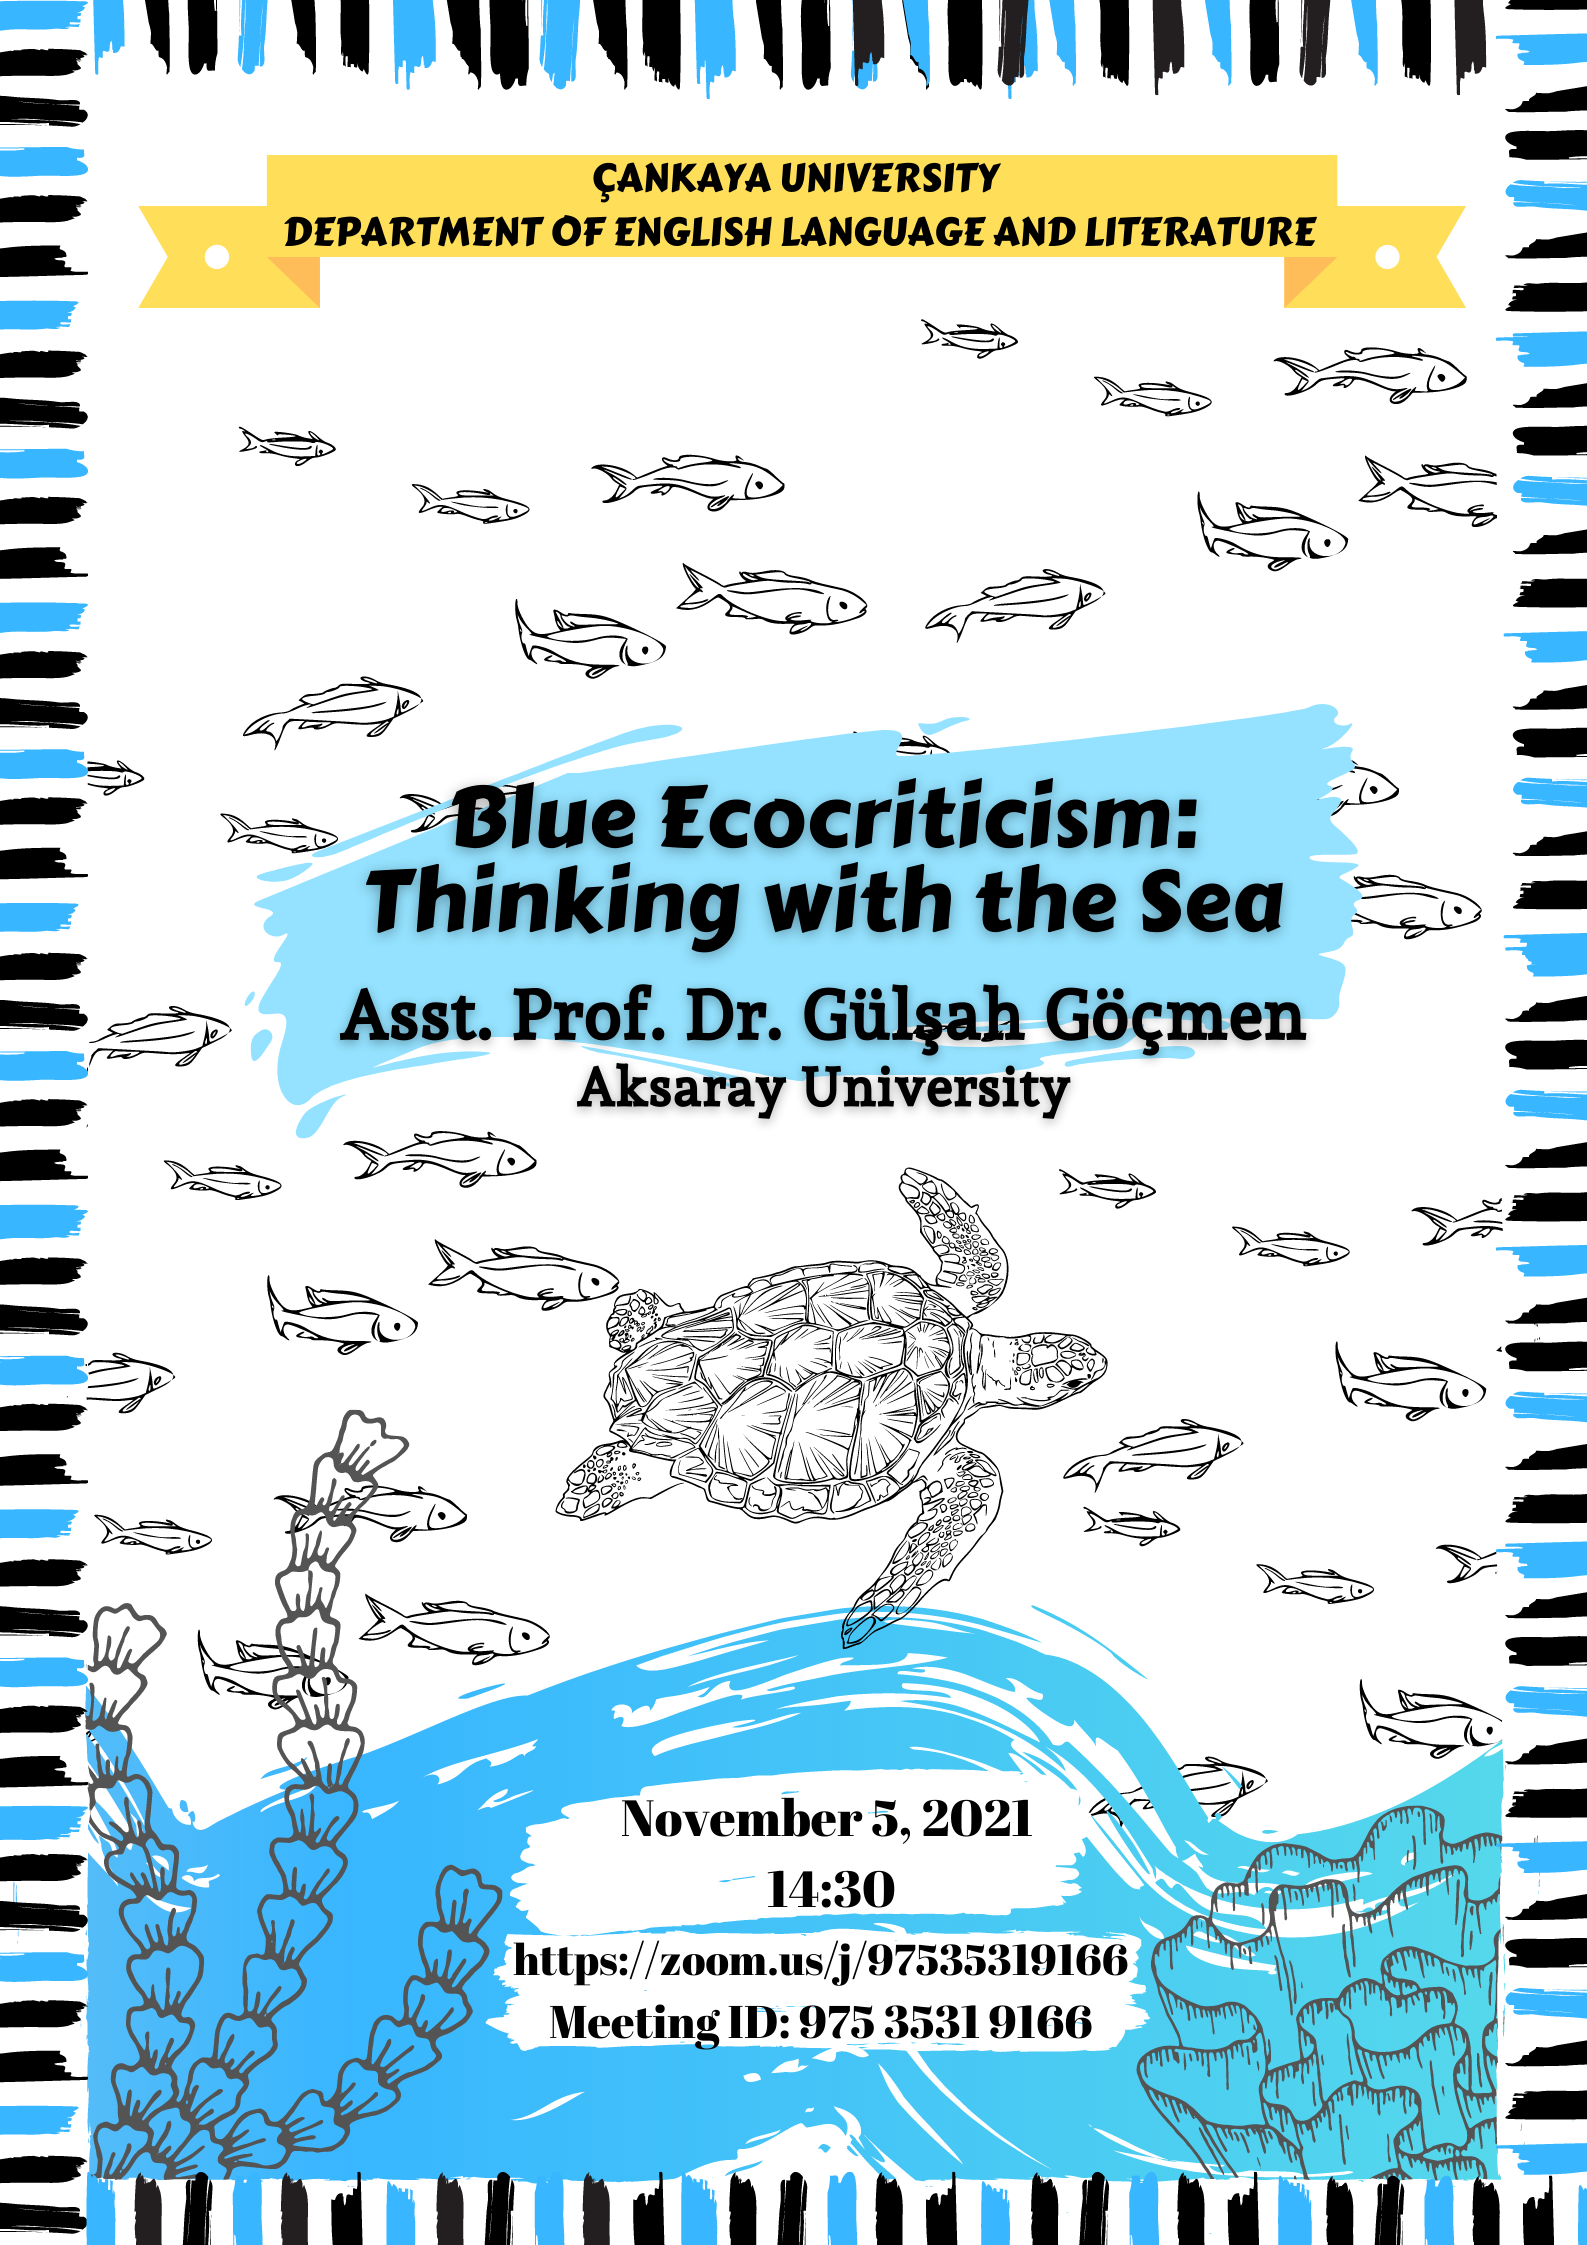 Edges Seminar Series: “Blue Ecocriticism: Thinking with the Sea”